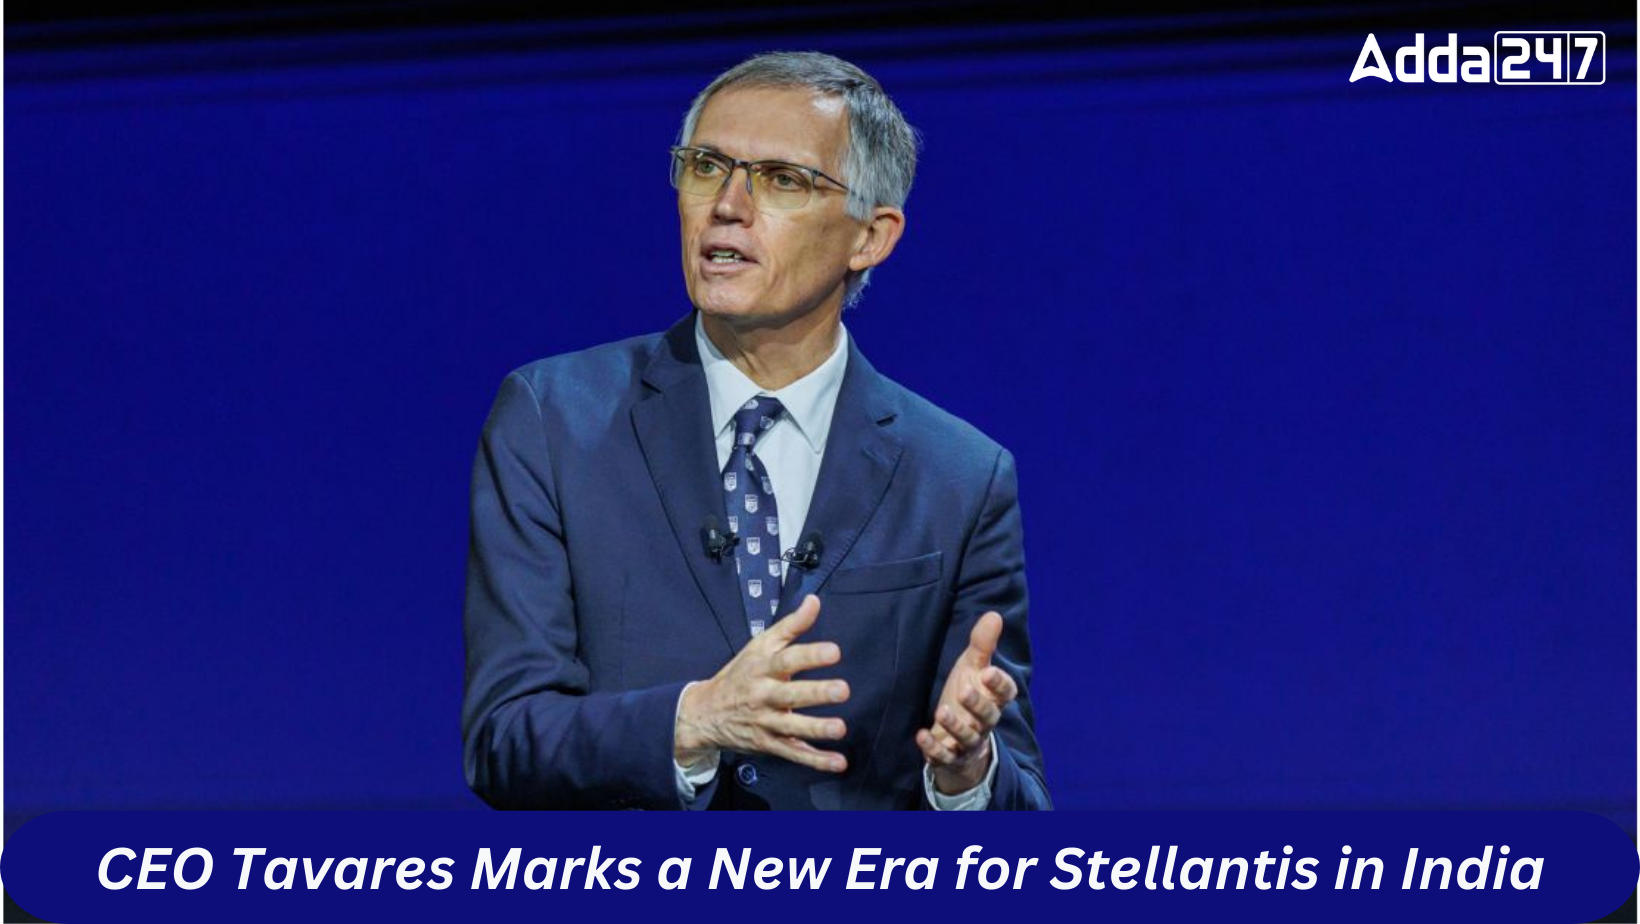 CEO Tavares Marks a New Era for Stellantis in India